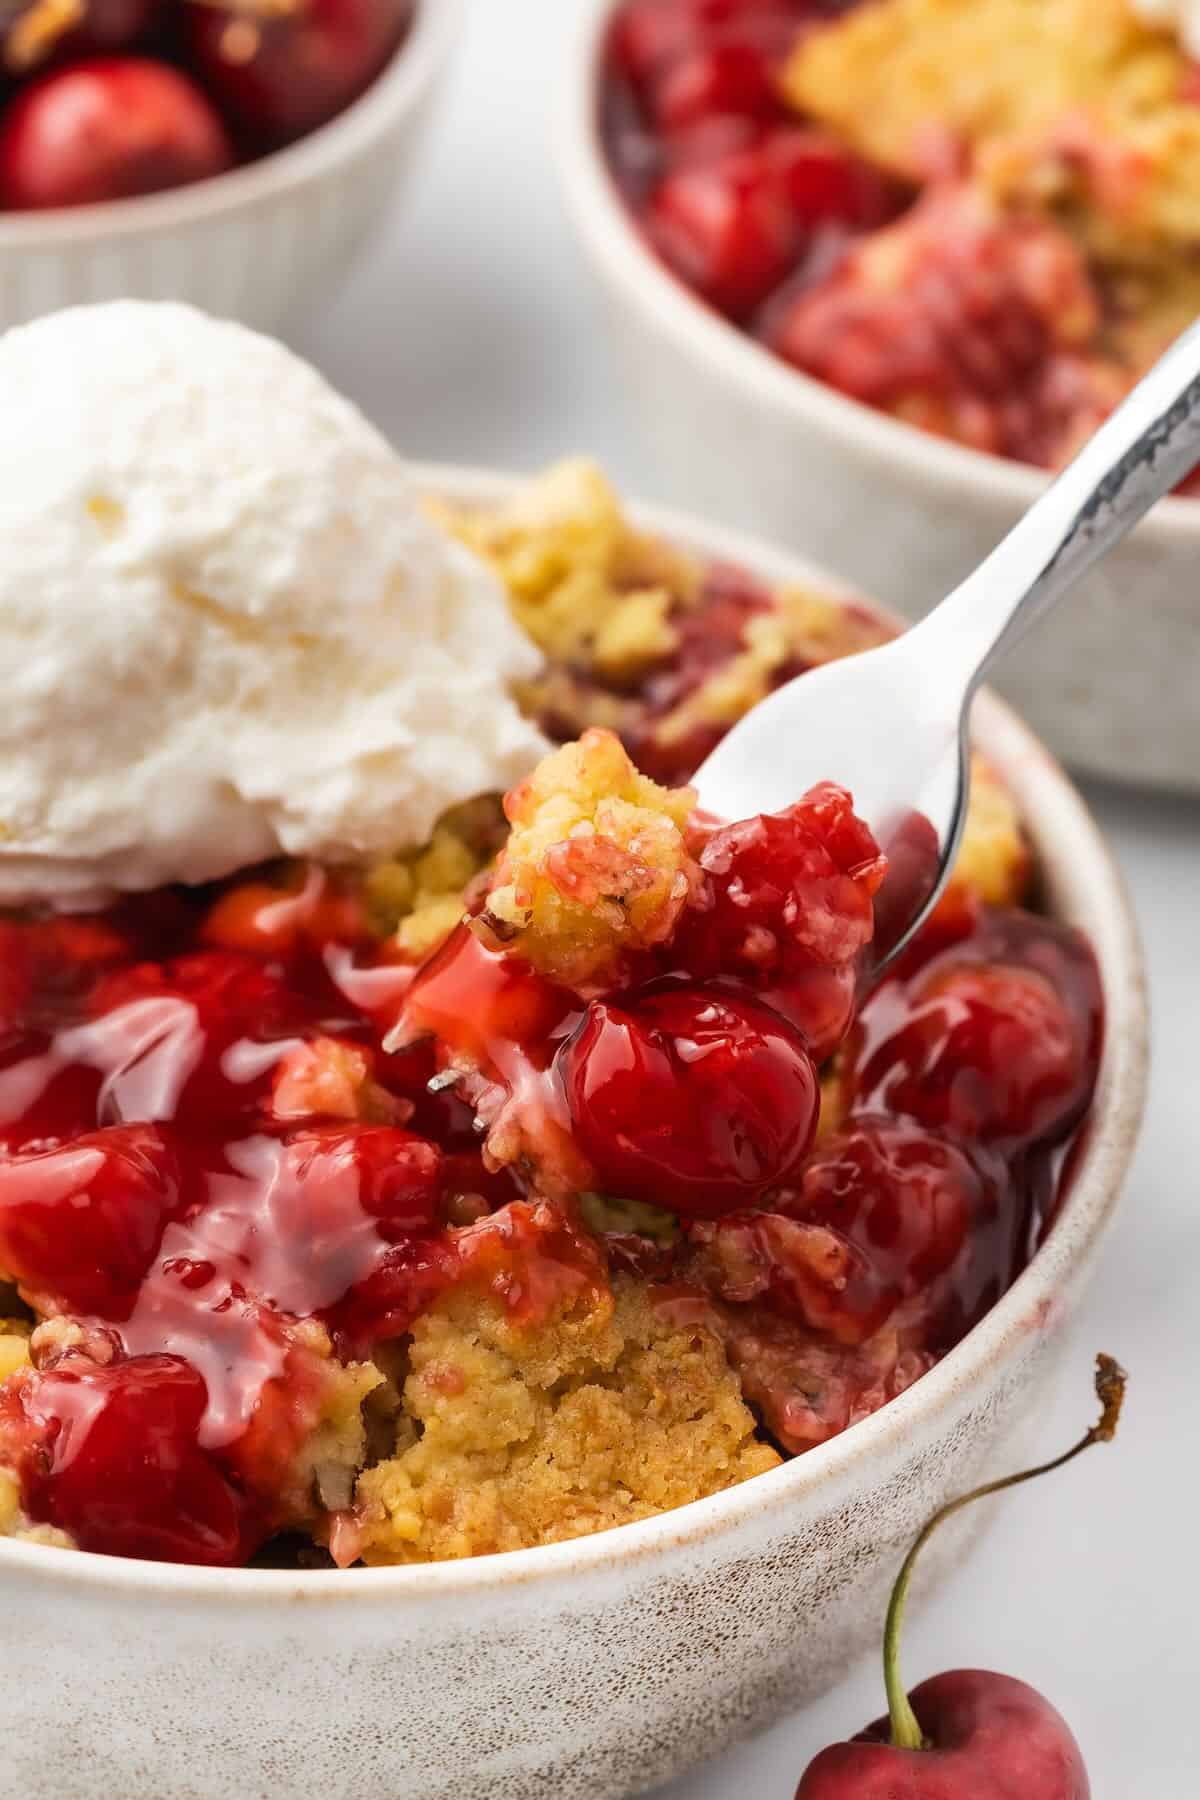 A serving of cherry cobbler, topped with a scoop of vanilla ice cream.